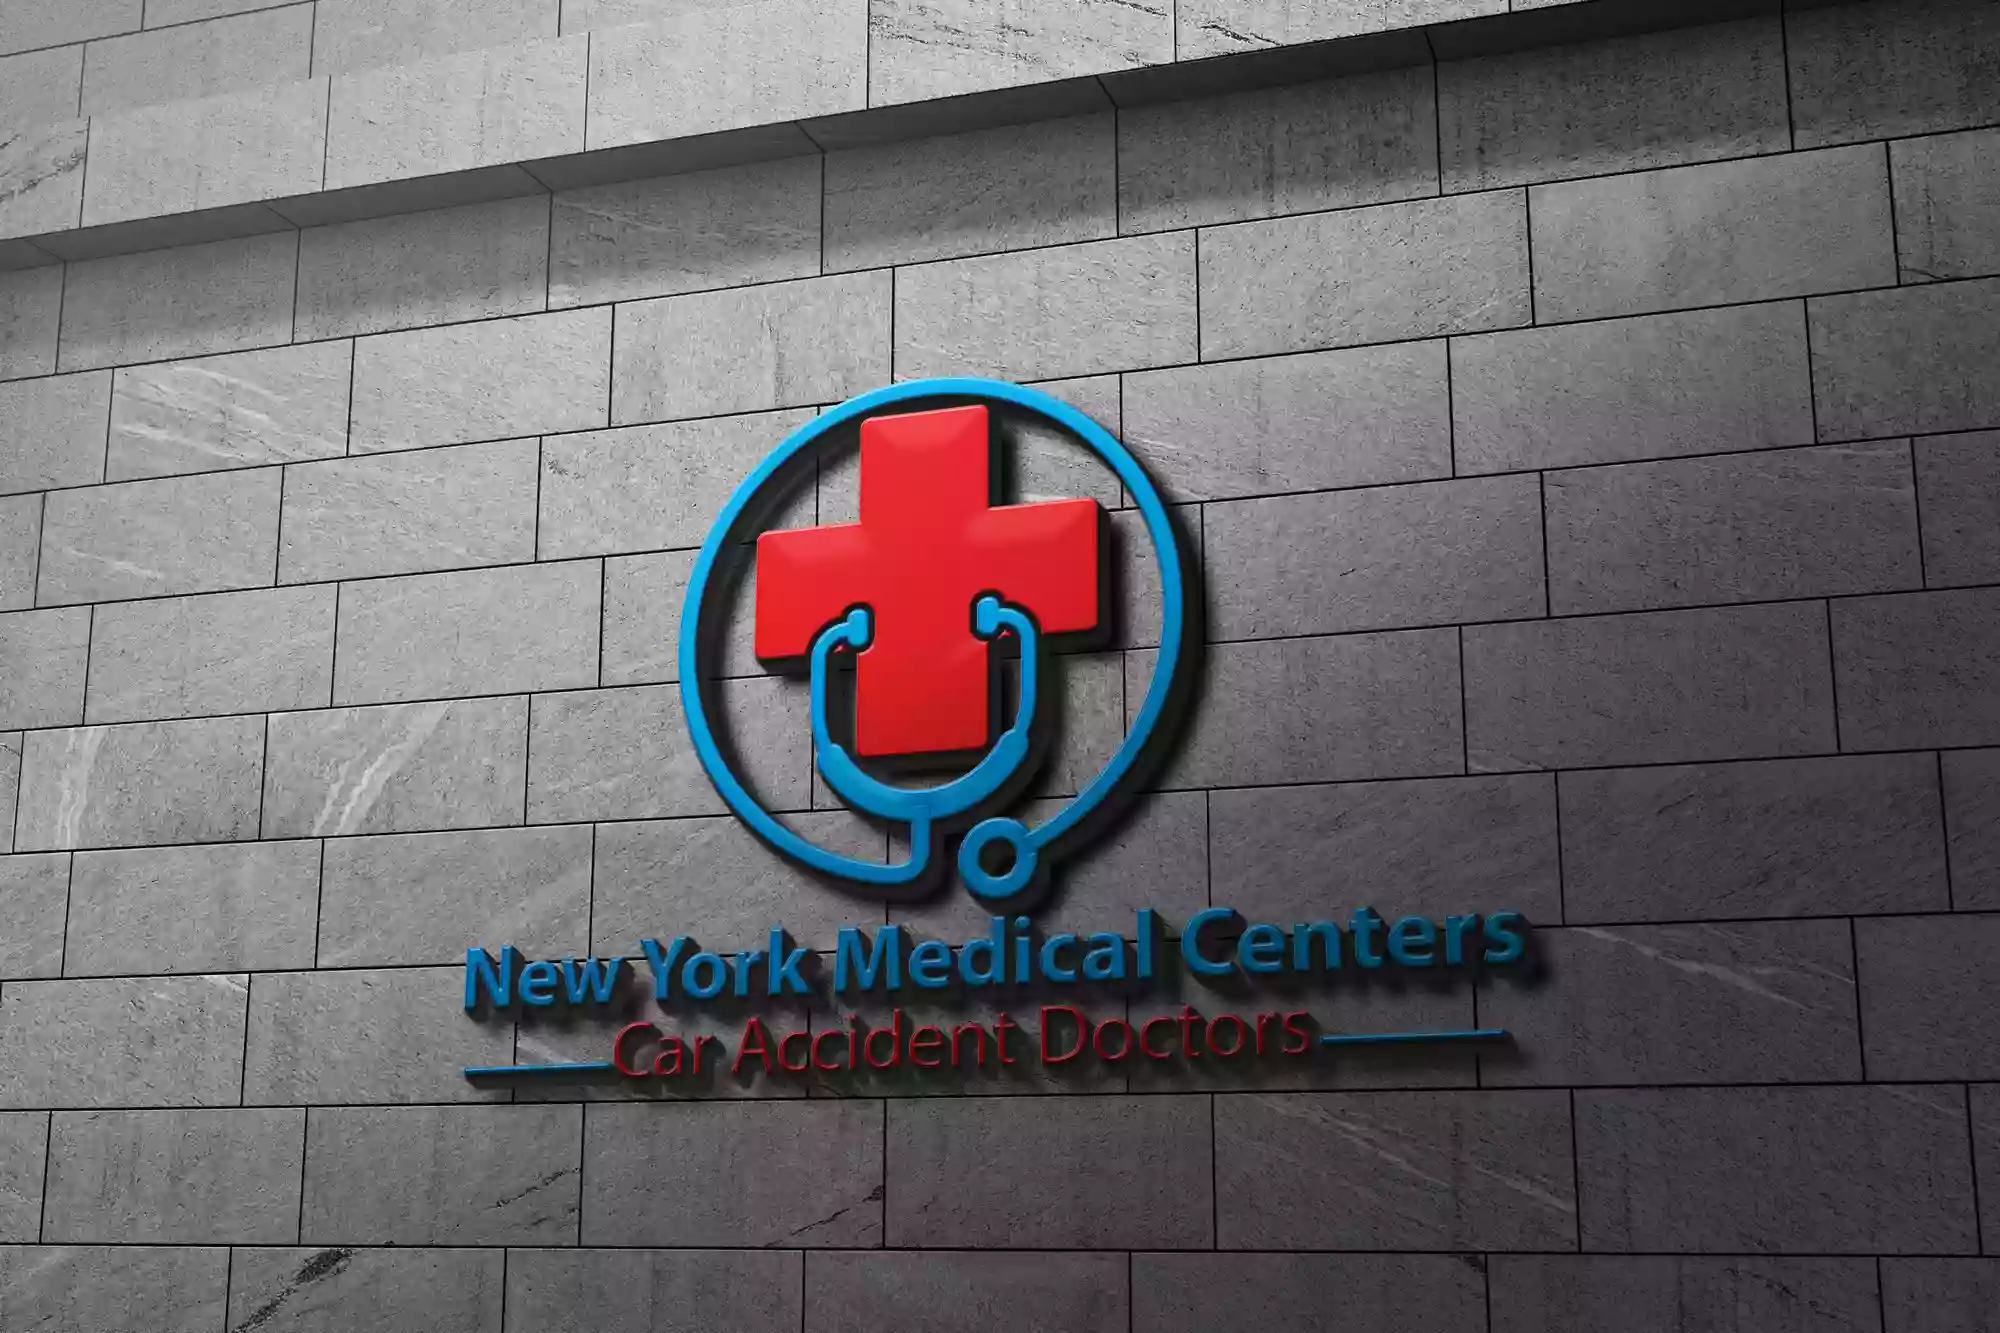 New York Medical Center - East New York No Fault Doctor - Workers Compensation Doctor